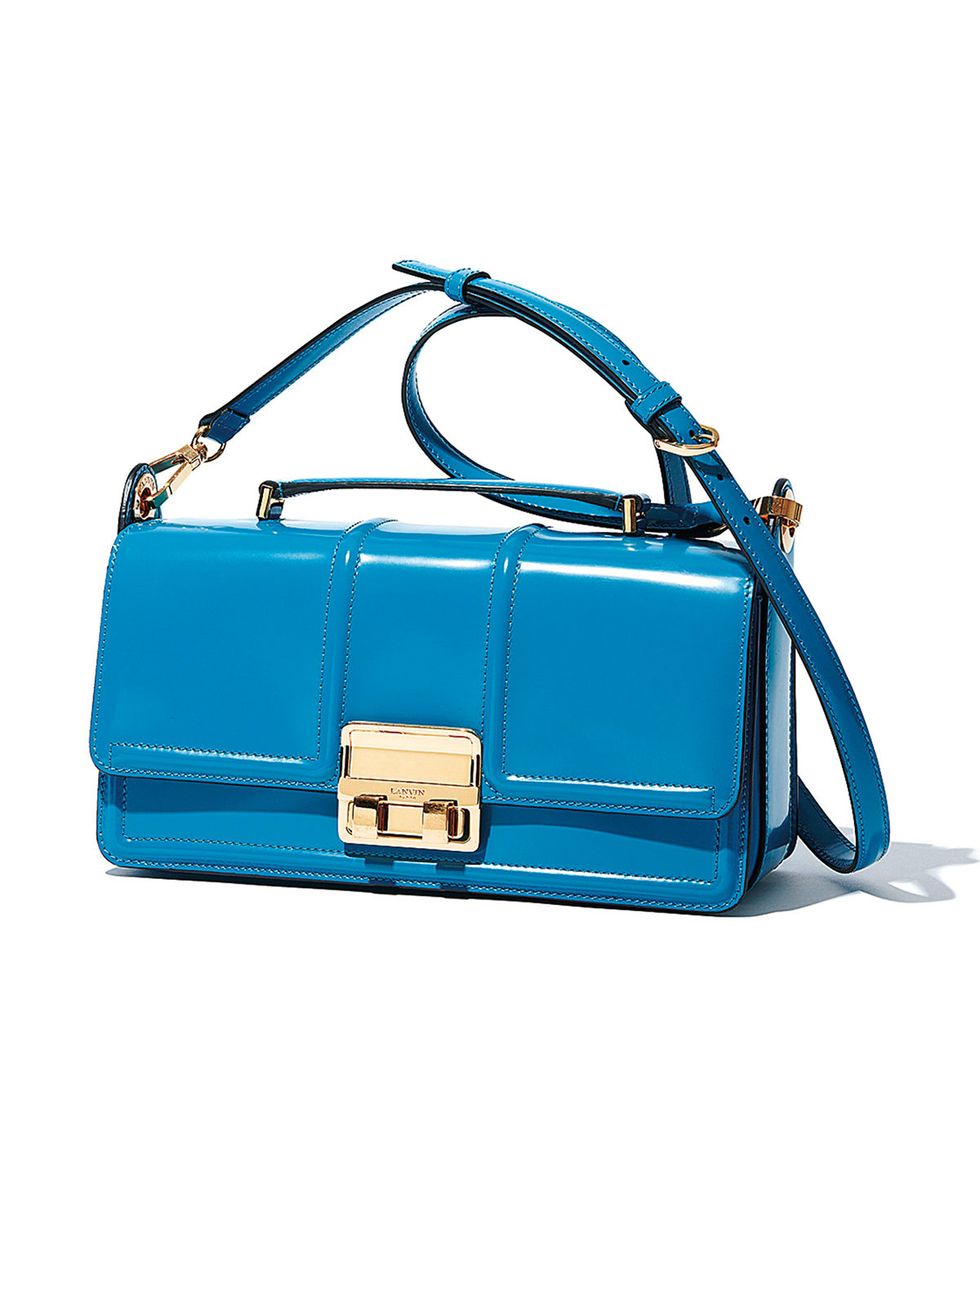 Blue, Bag, Style, Turquoise, Aqua, Teal, Electric blue, Luggage and bags, Azure, Travel, 